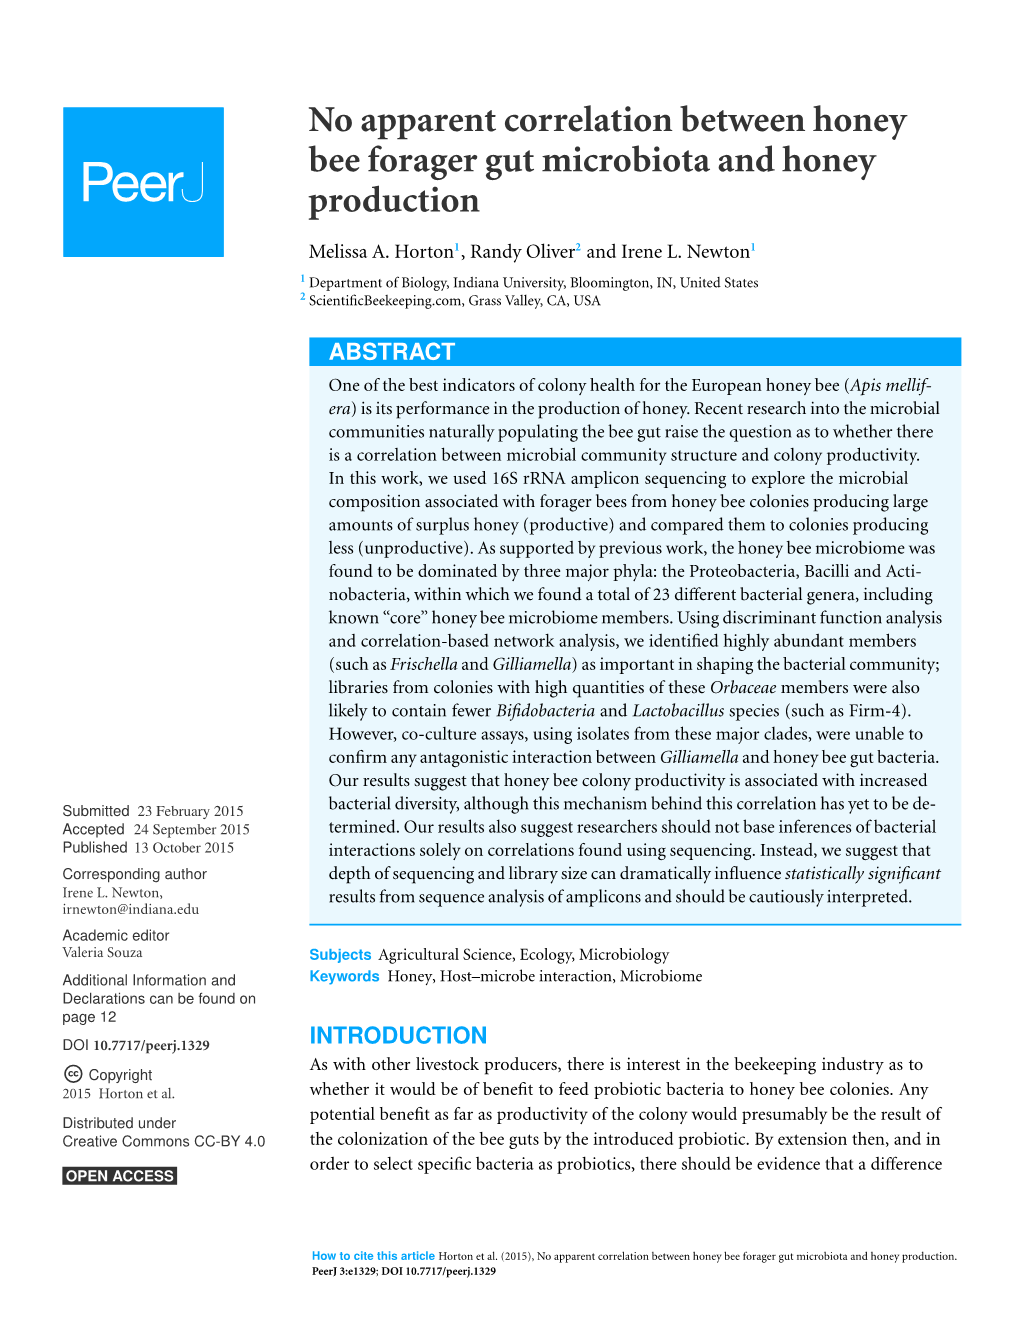 No Apparent Correlation Between Honey Bee Forager Gut Microbiota and Honey Production